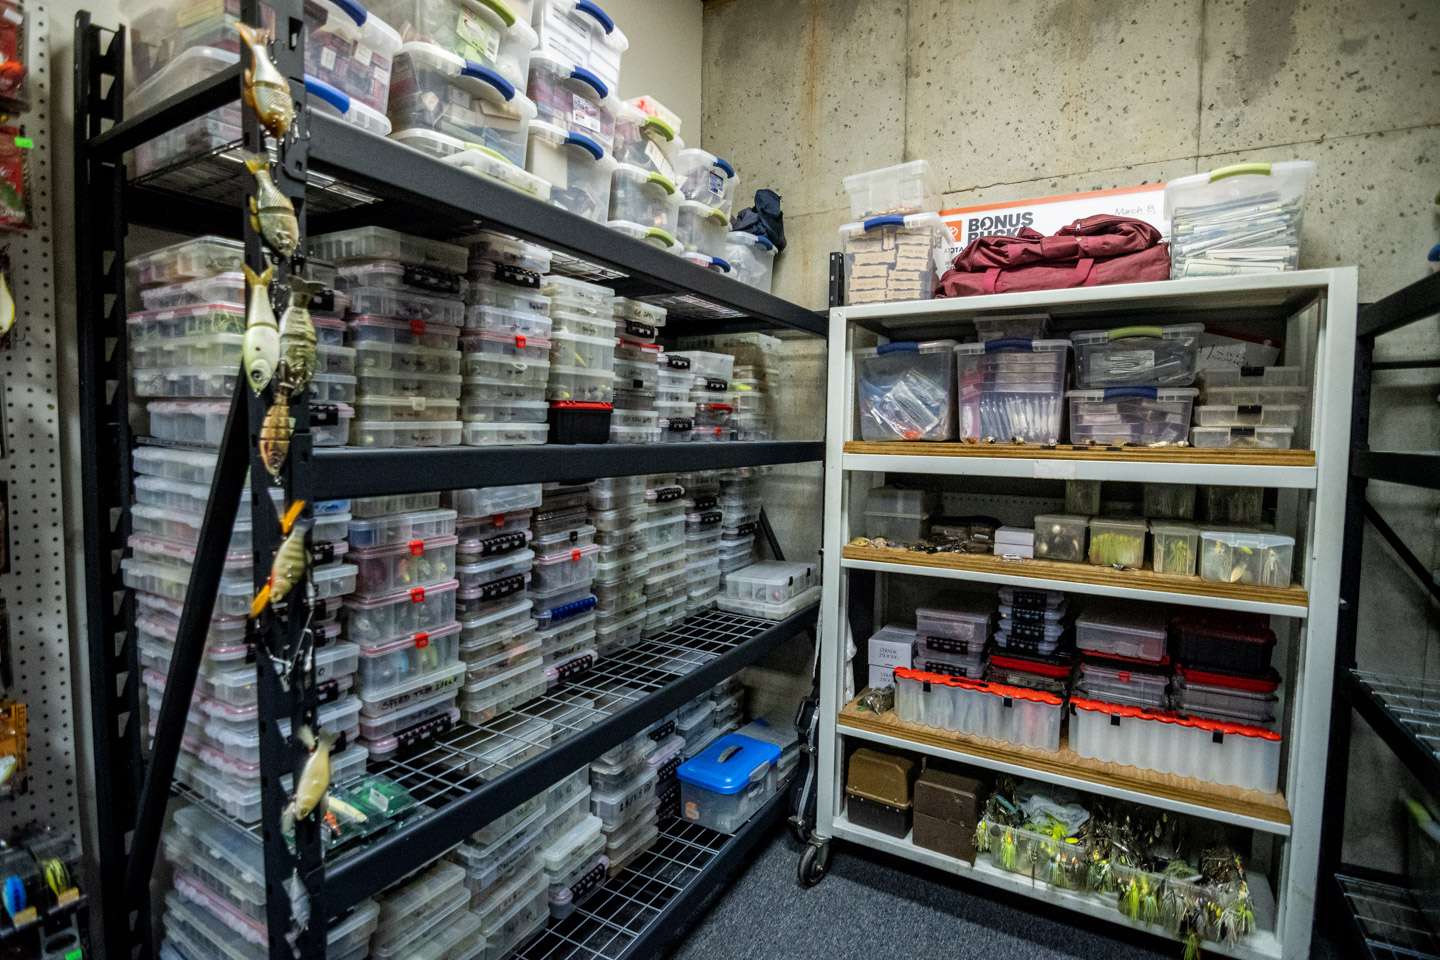 The left shelf holds terminal tackle and baits ranging from topwater, to jerkbaits, crankbaits and so on. Basically, they are in order from top of the water column baits down to the bottom of the water column.